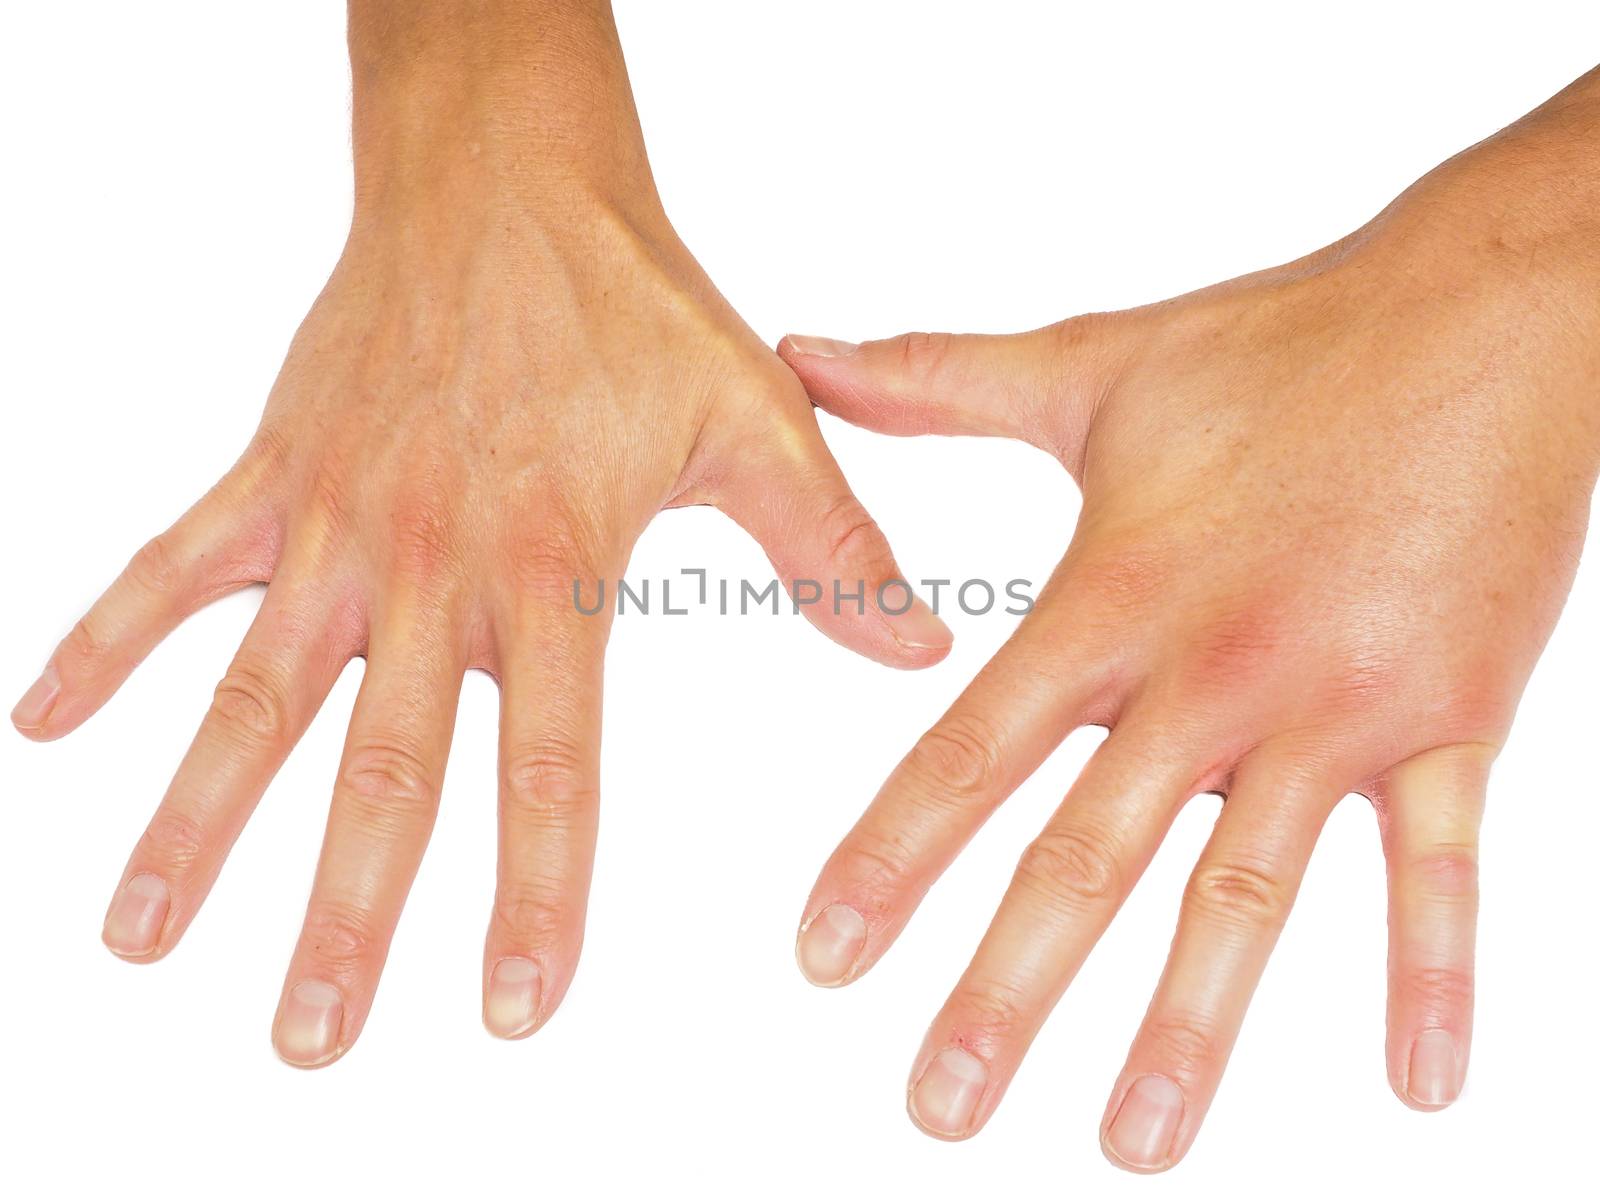 Comparing swollen male hands isolated towards white background by Arvebettum